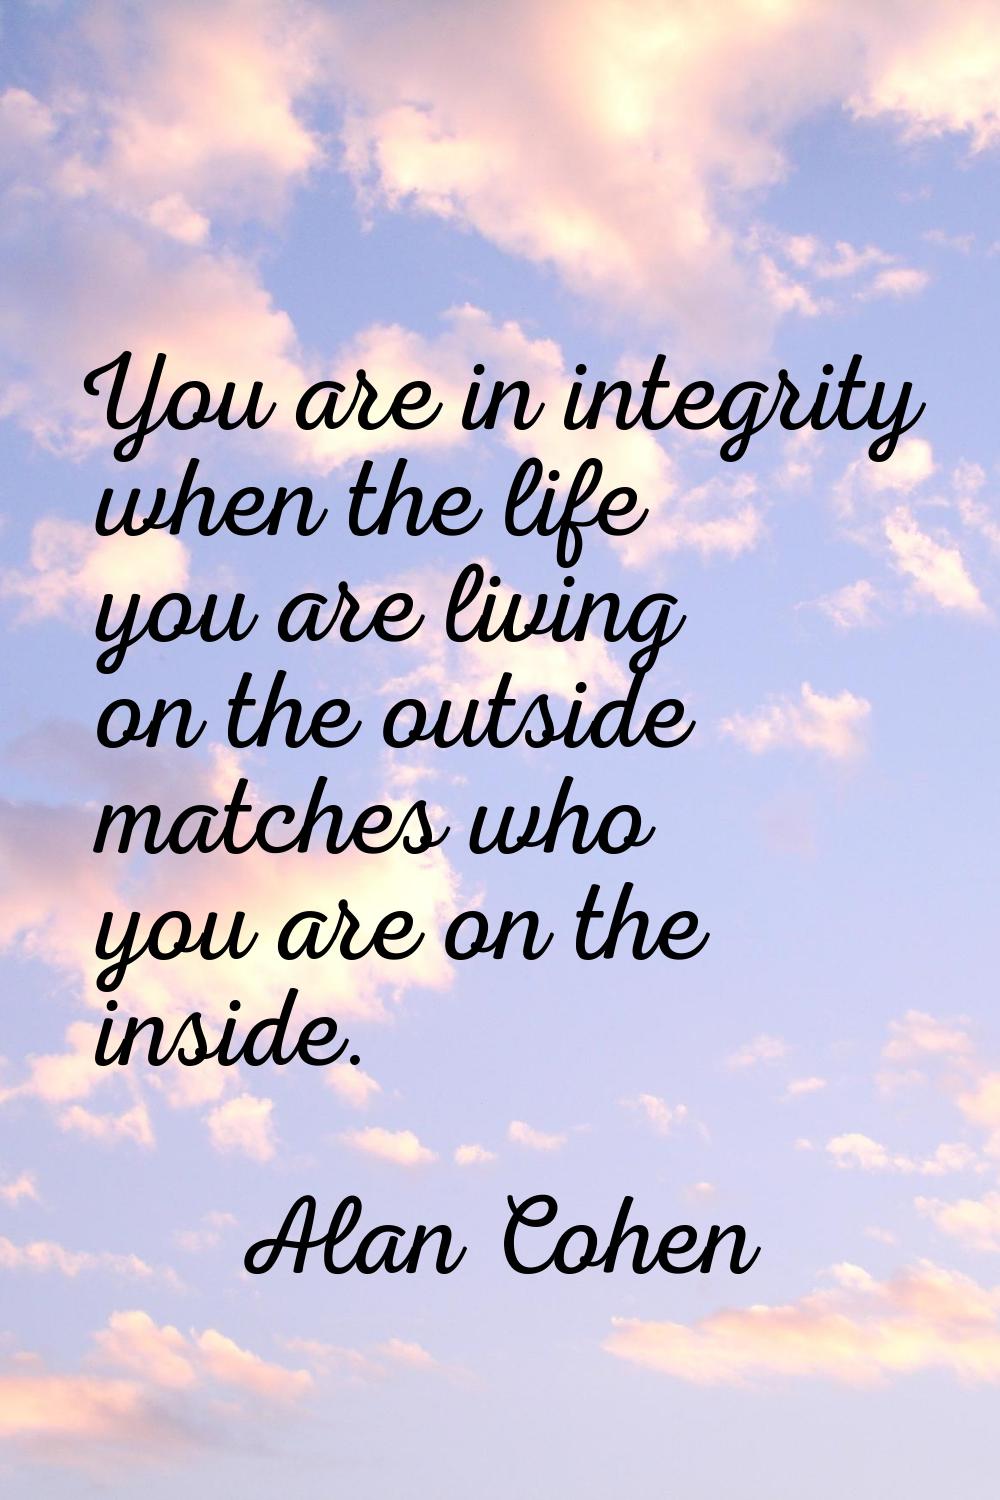 You are in integrity when the life you are living on the outside matches who you are on the inside.